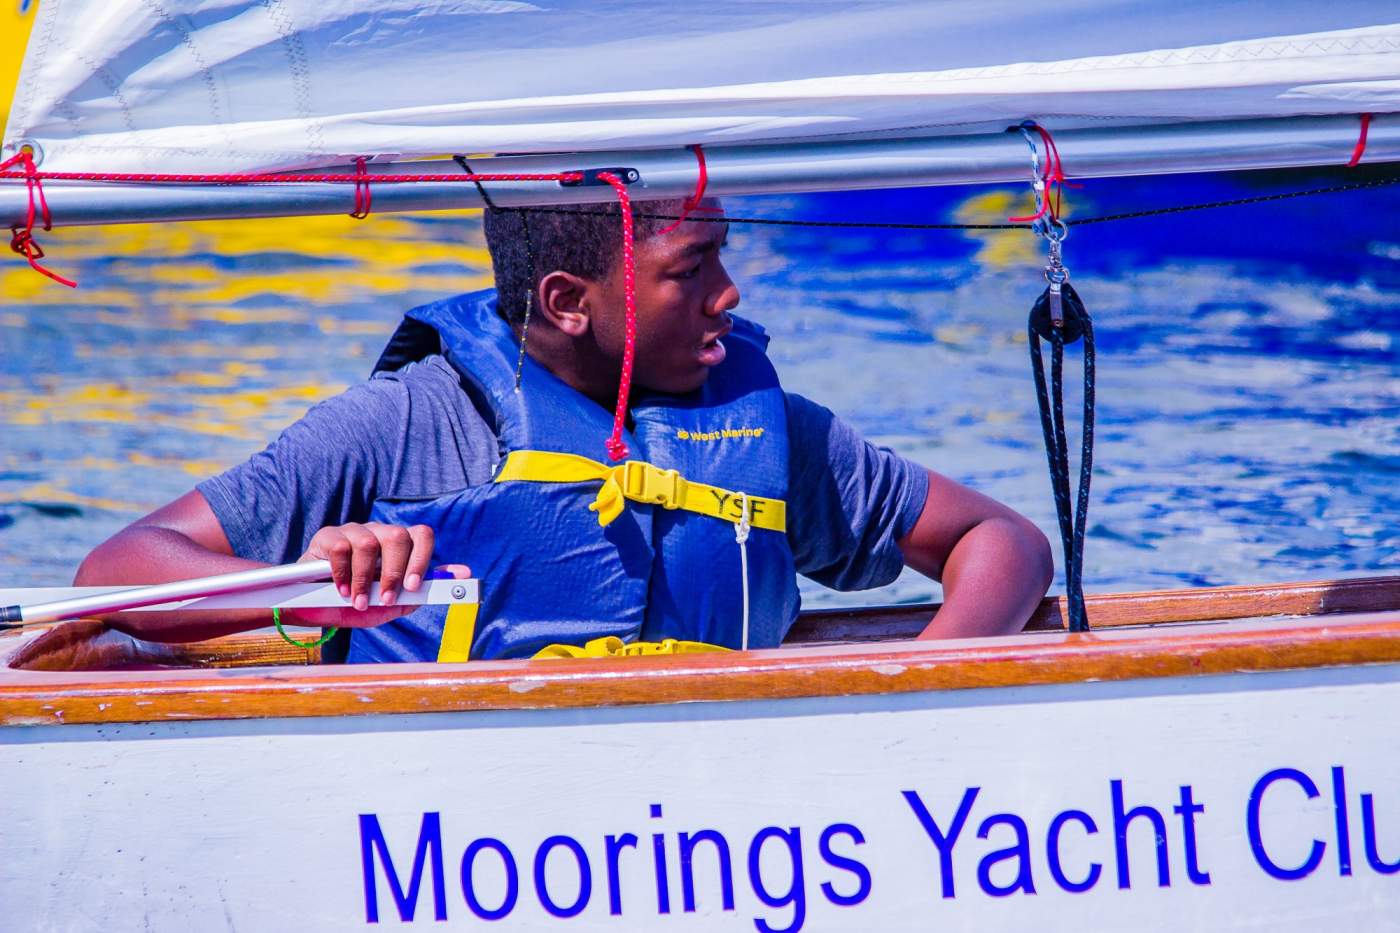 Young sailor in Moorings boat